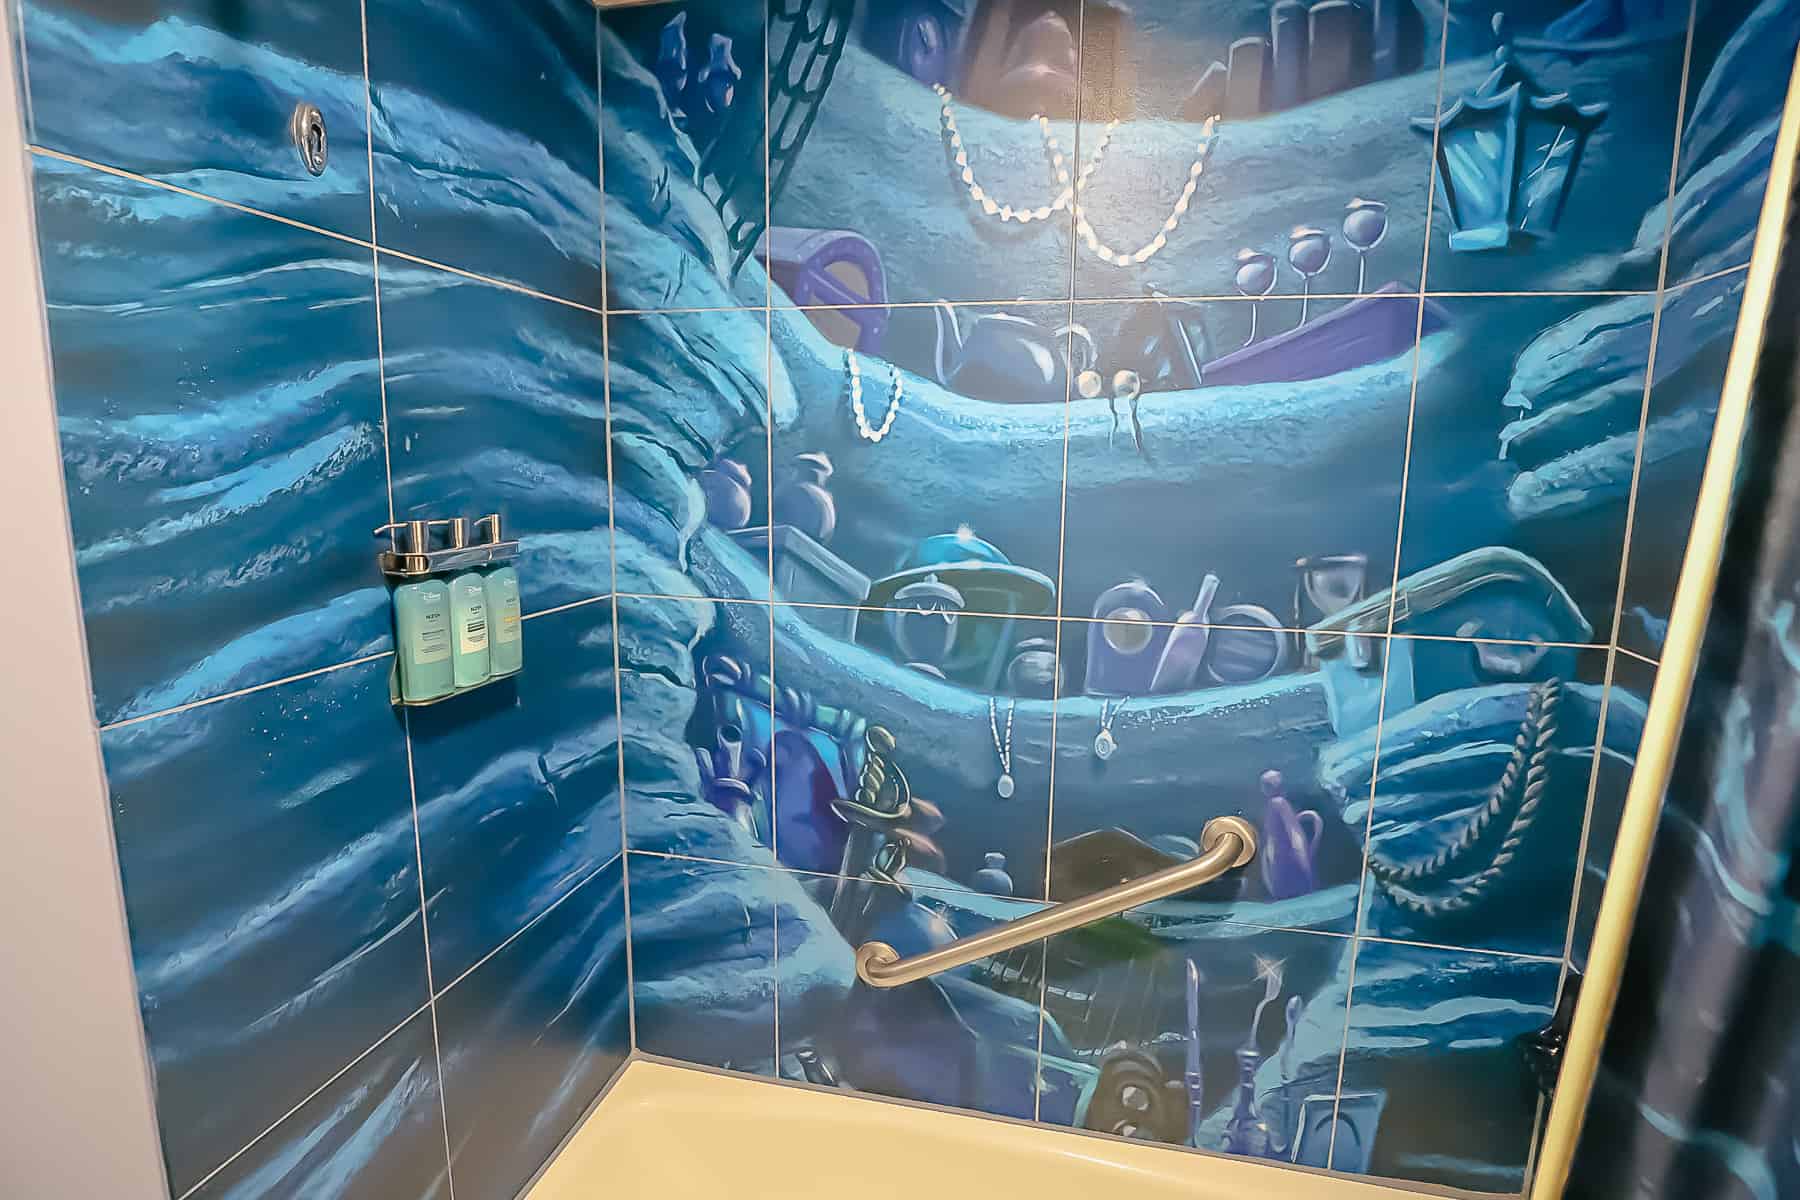 the shower tiles are painted like a mural of Ariel's treasure trove 